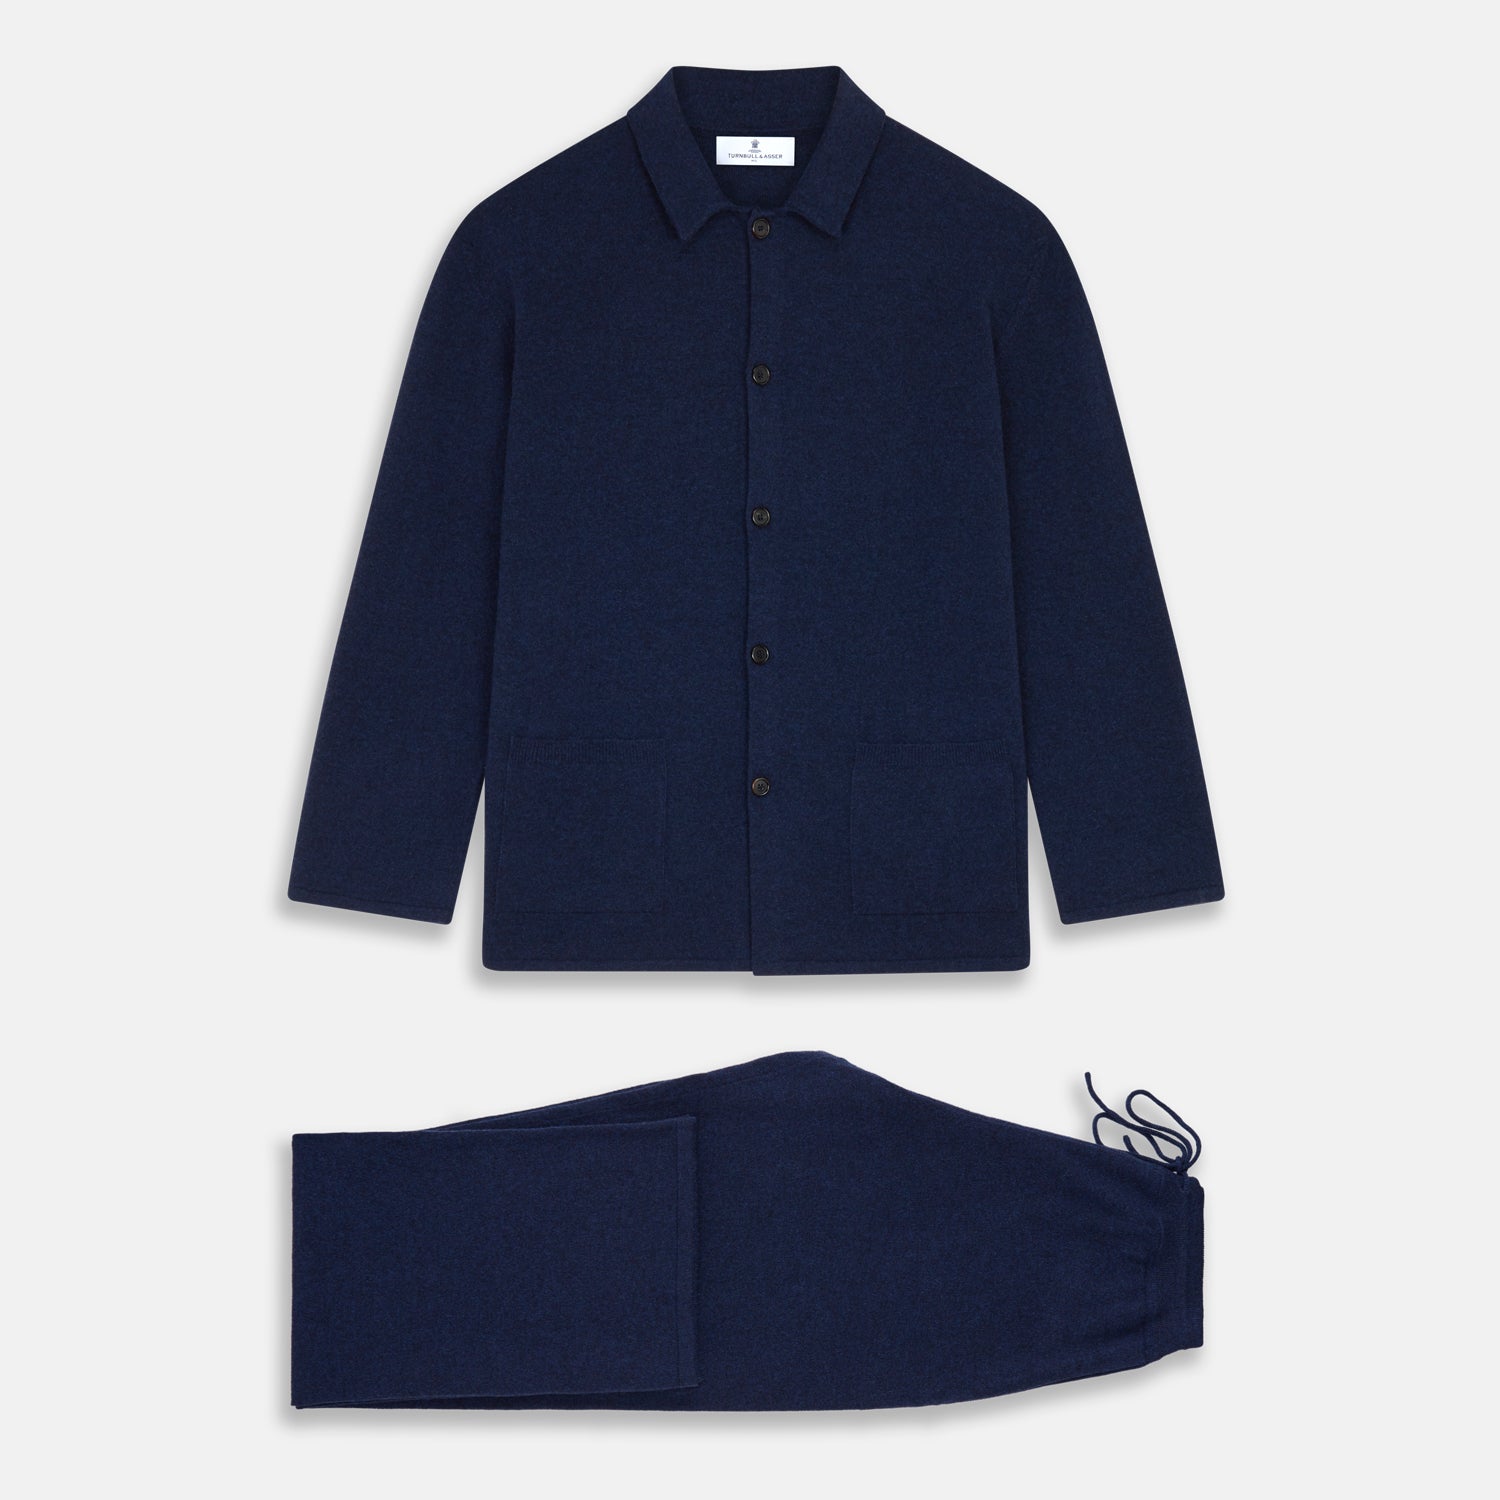 Navy Cashmere Knitted Traditional Pyjama Set